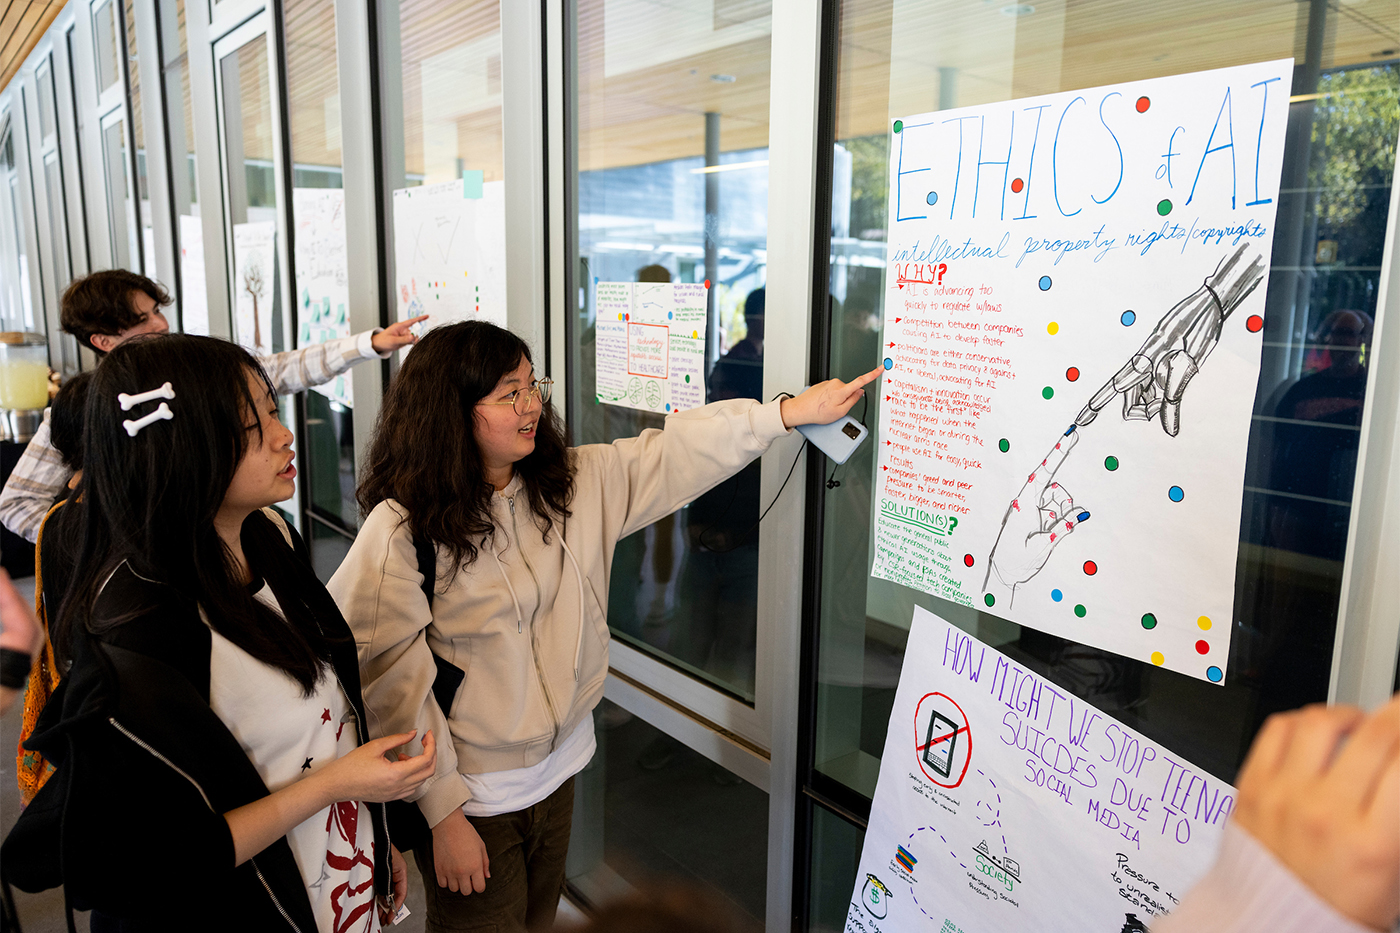 Students pointing to a posterboard abotu the Ethics of AI.